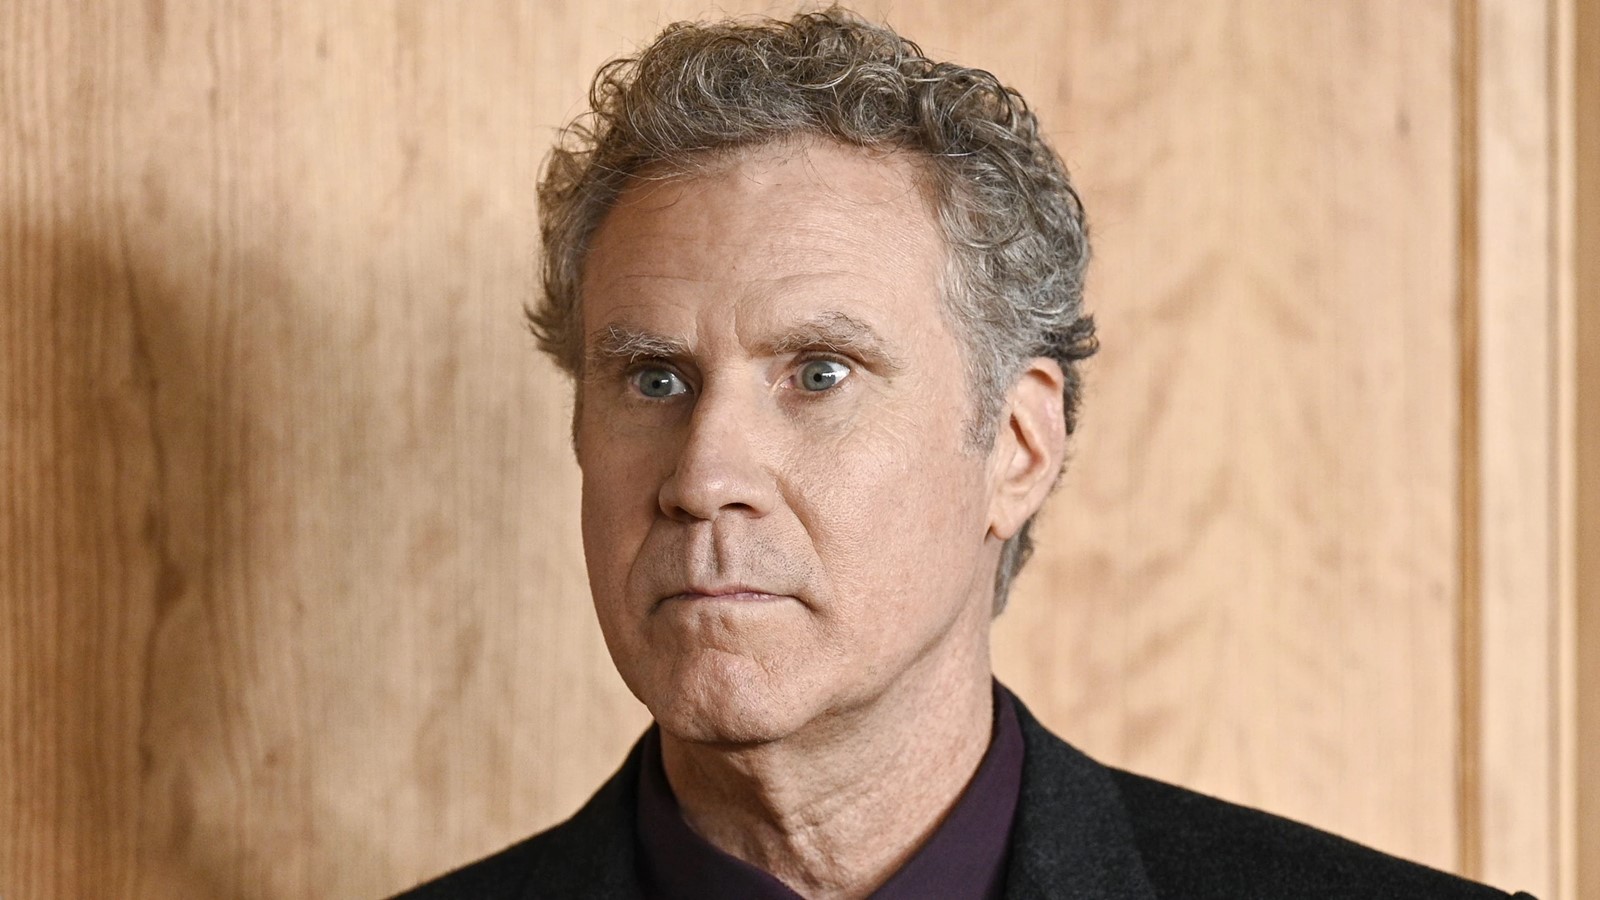 Will Ferrell will star in a new comedy in development, with Rian Johnson among the producers